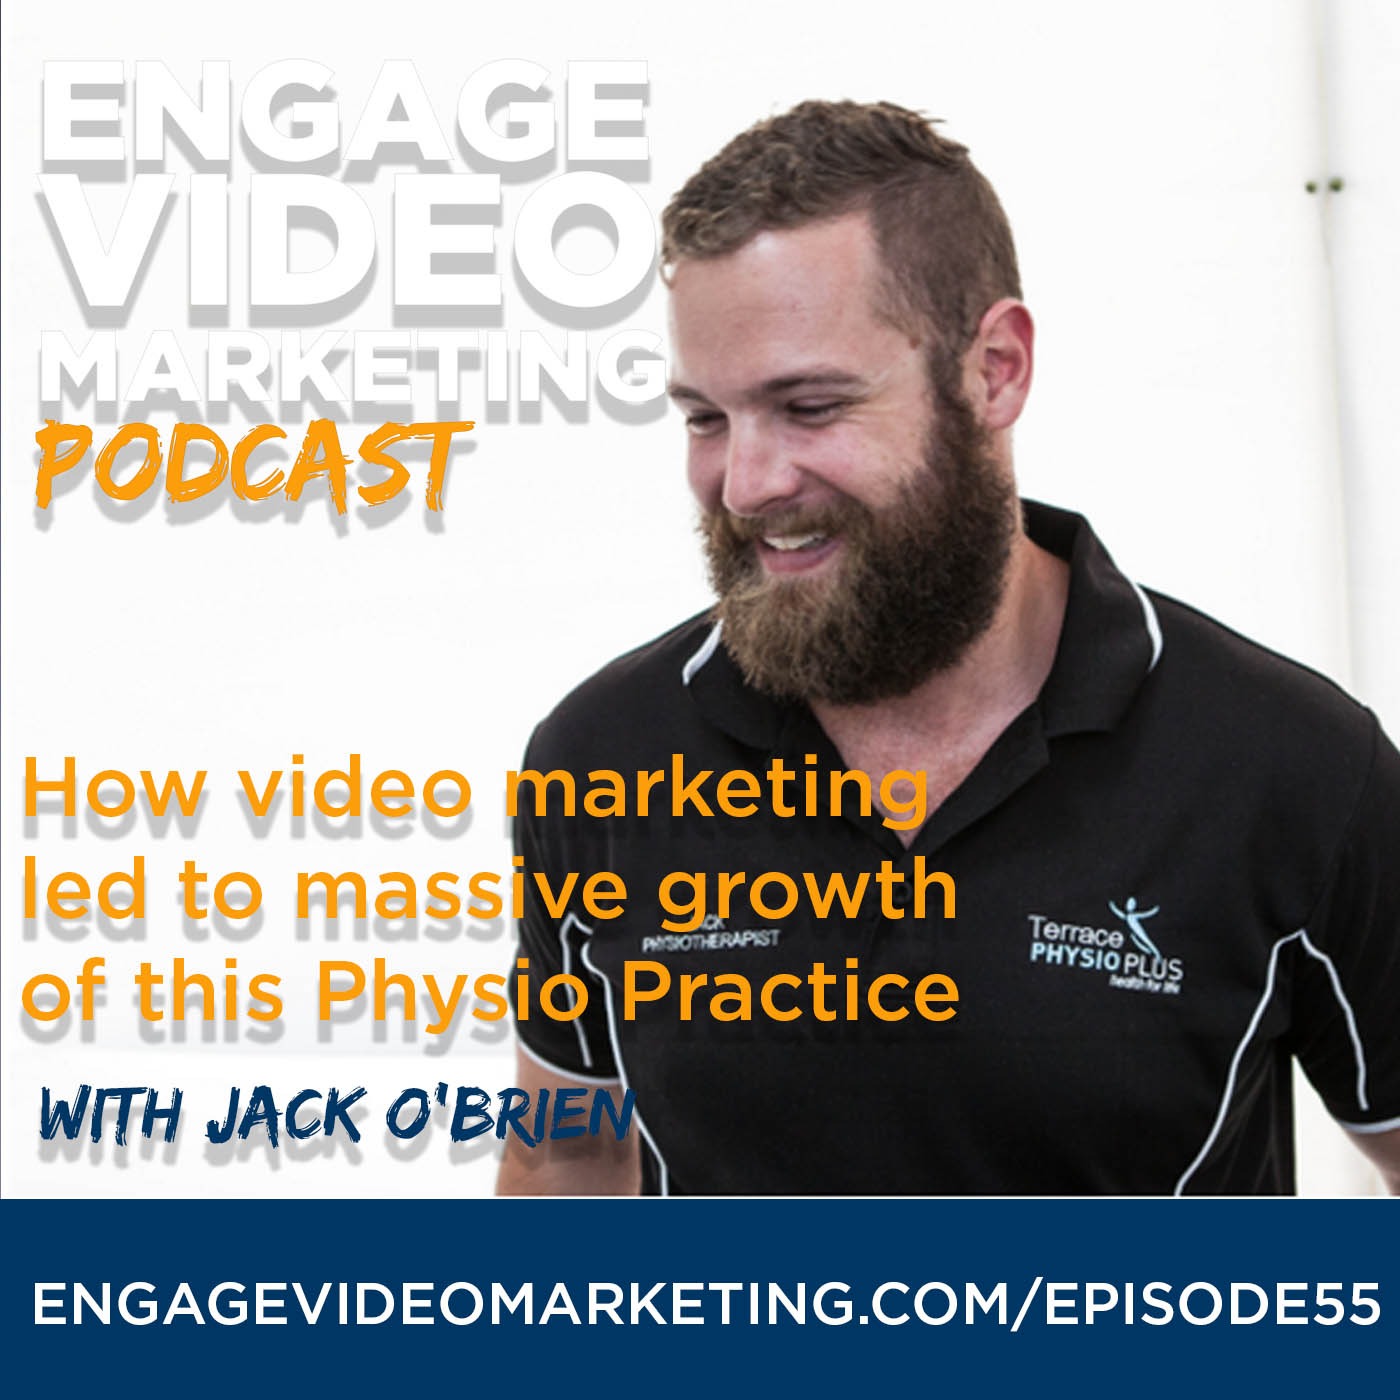 How Video Marketing Led to Massive Growth of this Physio Practice